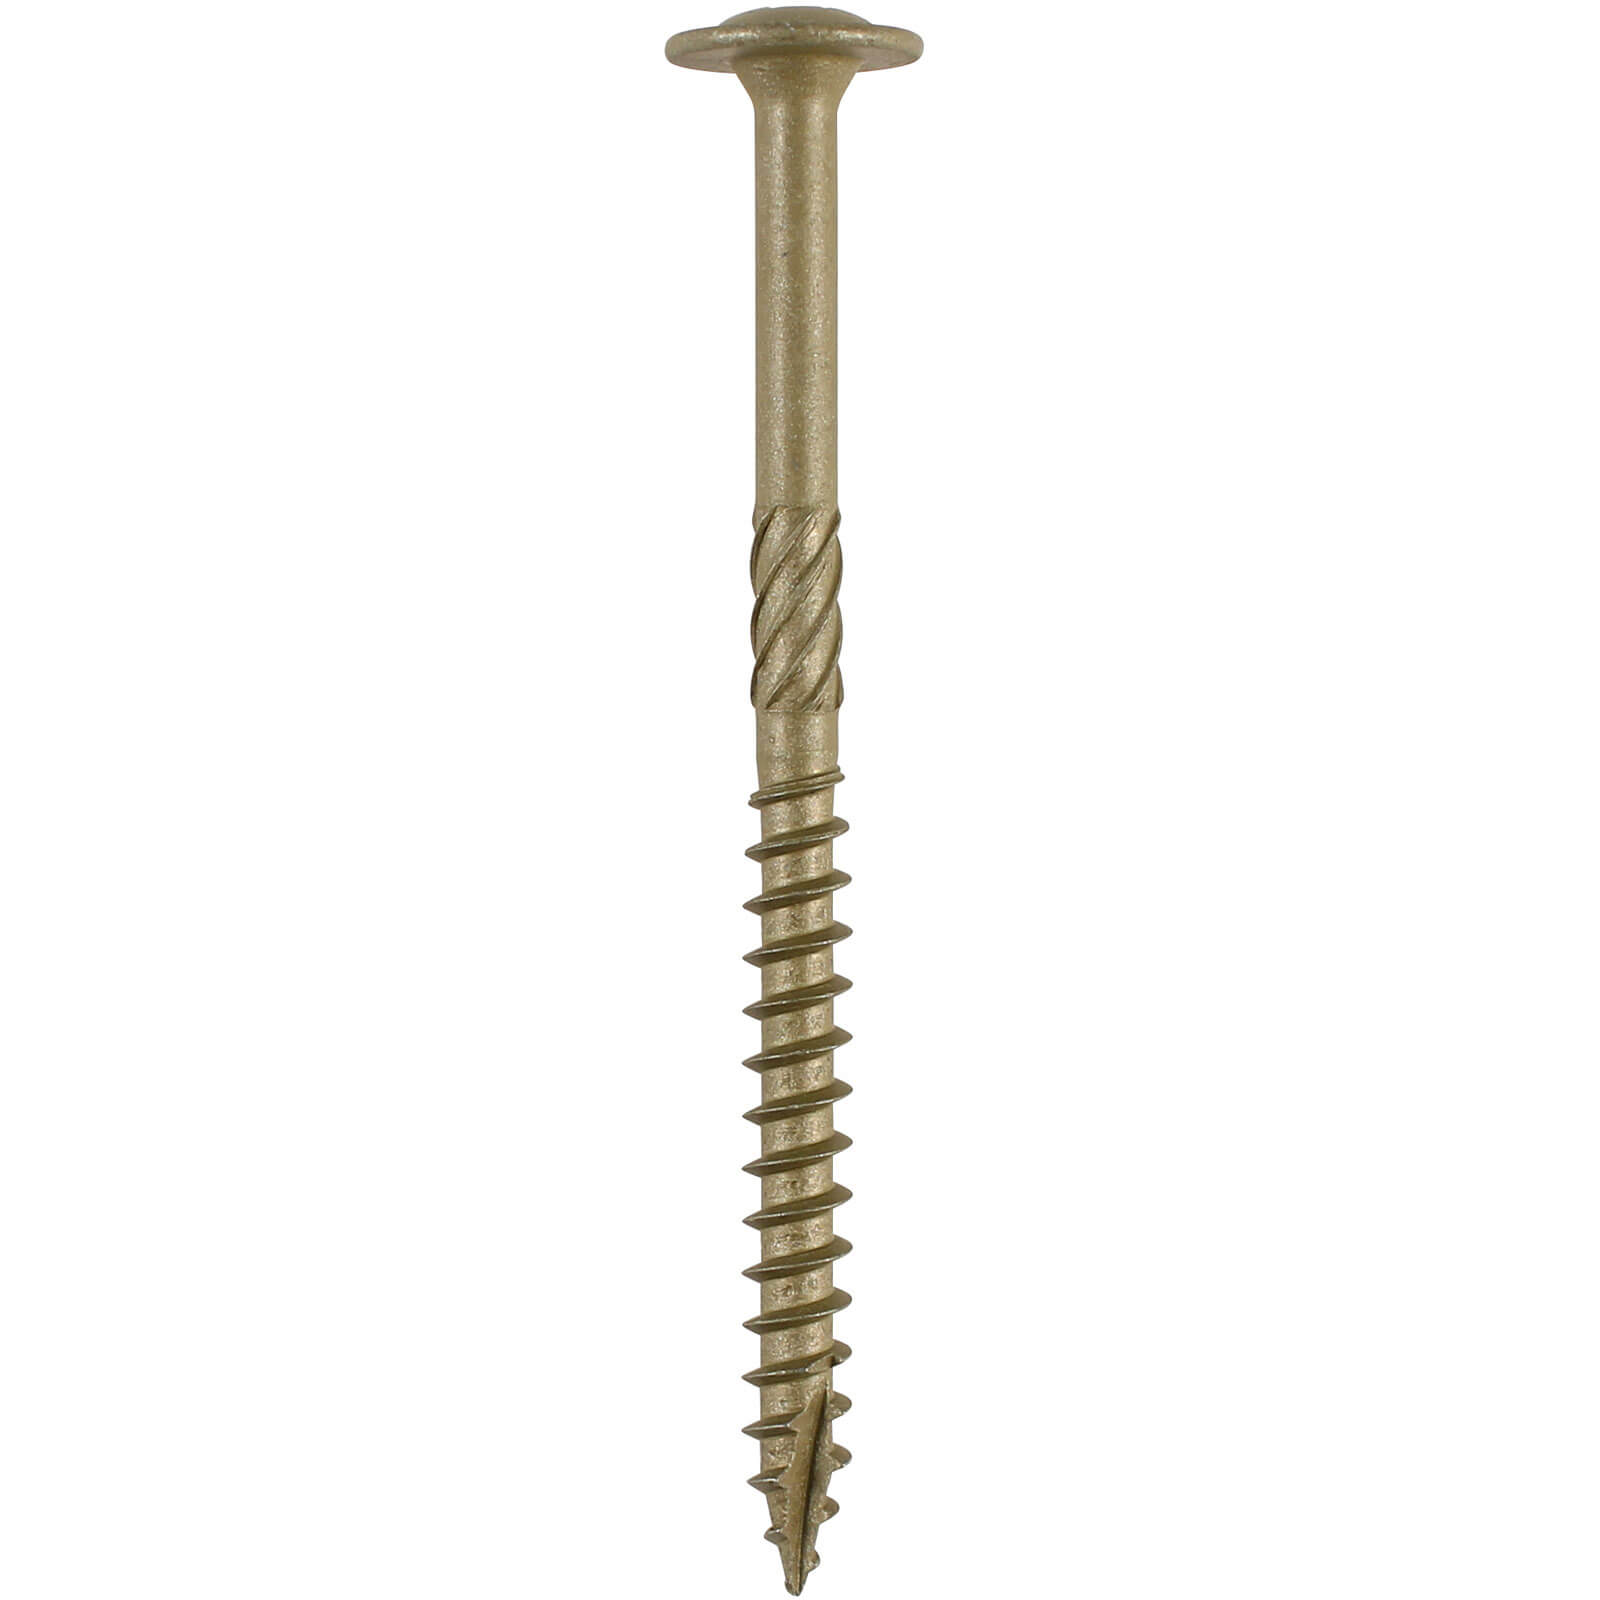 Photos - Nail / Screw / Fastener TIMCO Wafer Torx Head Index Wood Screws 8mm 225mm Pack of 50 225INW 